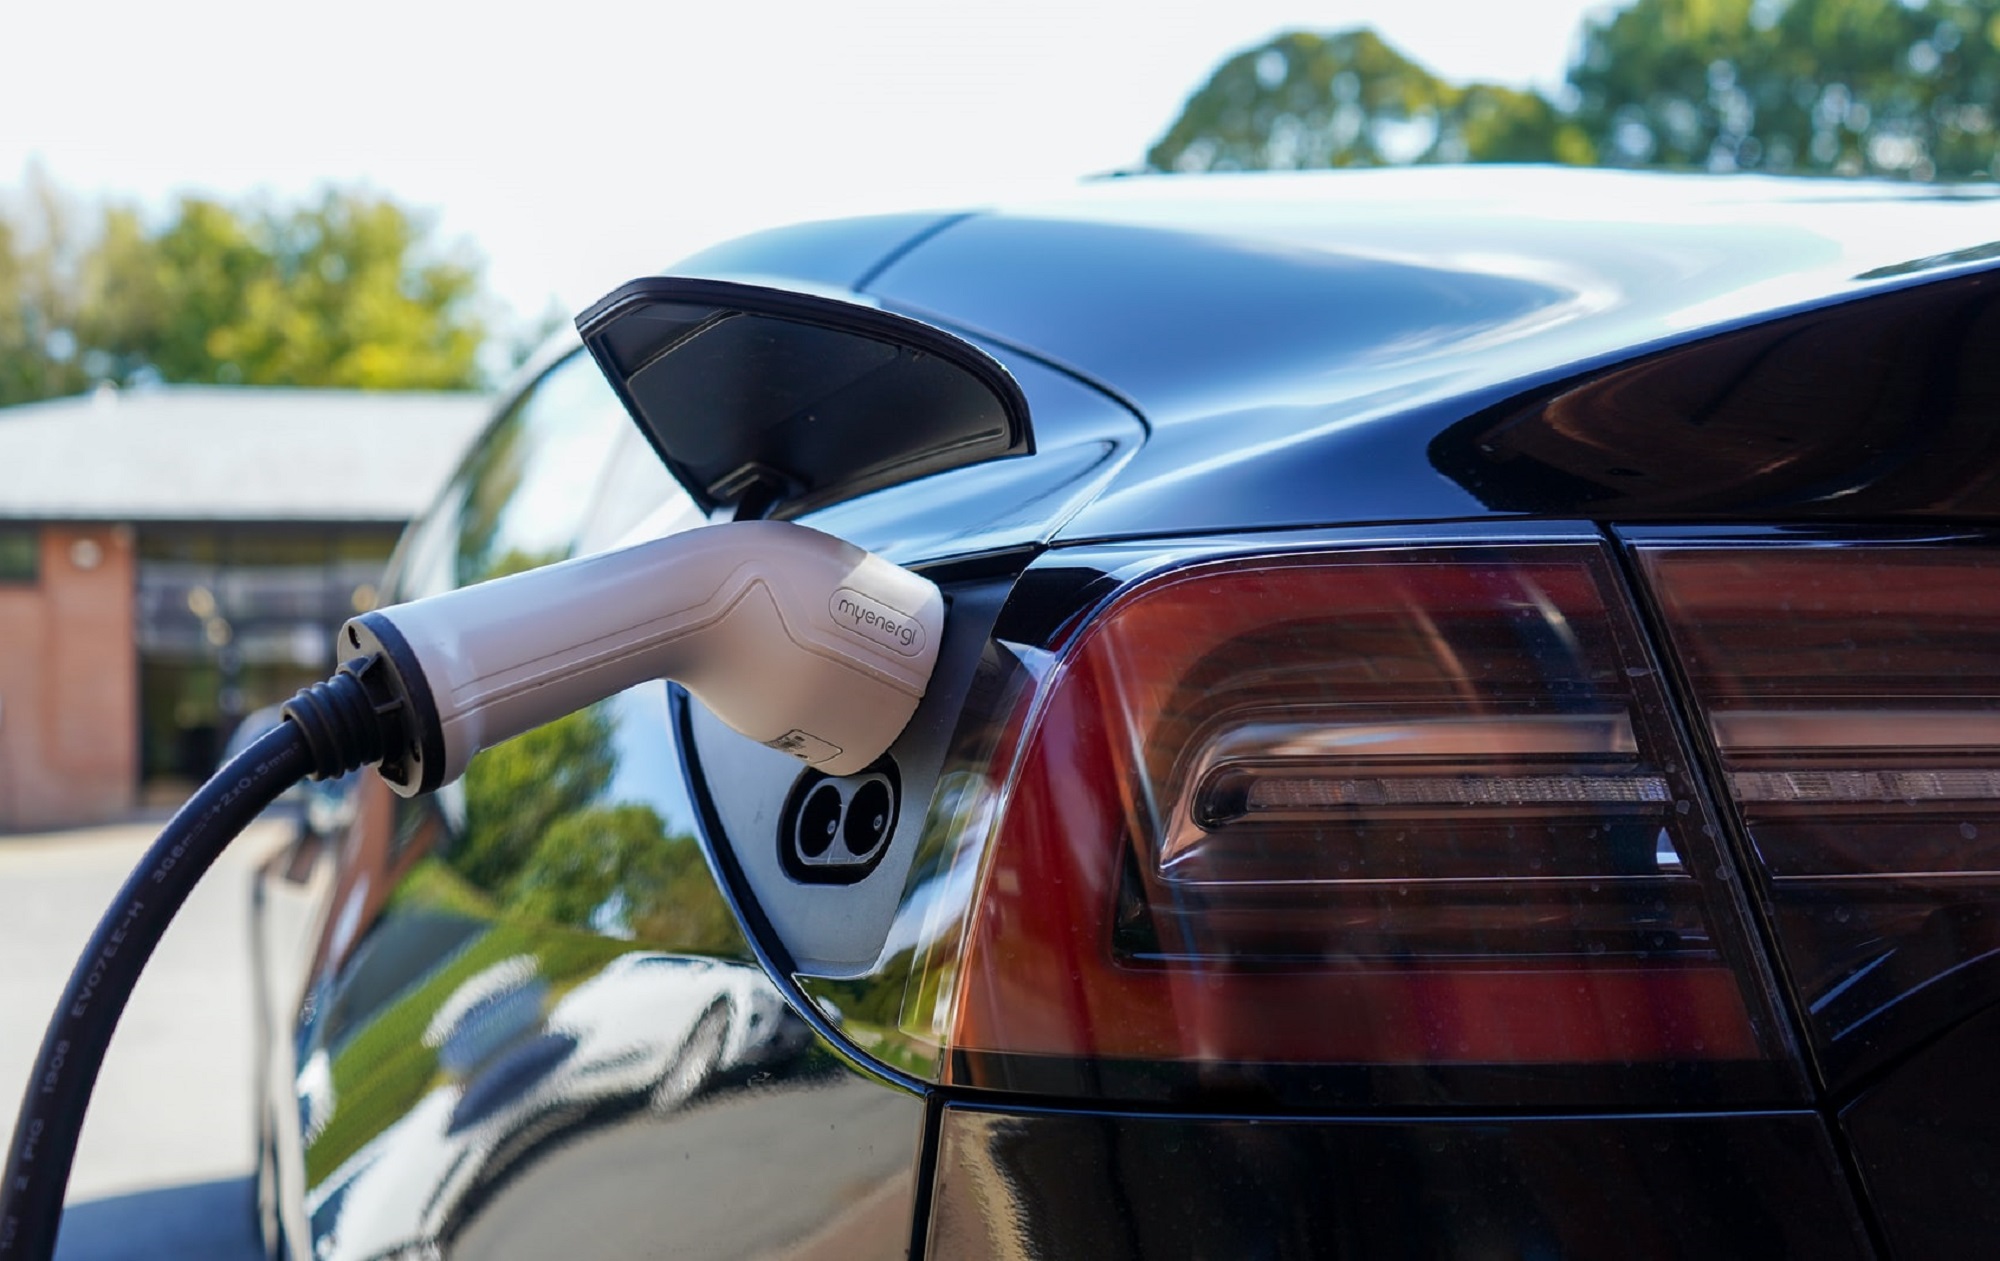 EV charging stations need repairs—but who’s going to foot the bill?